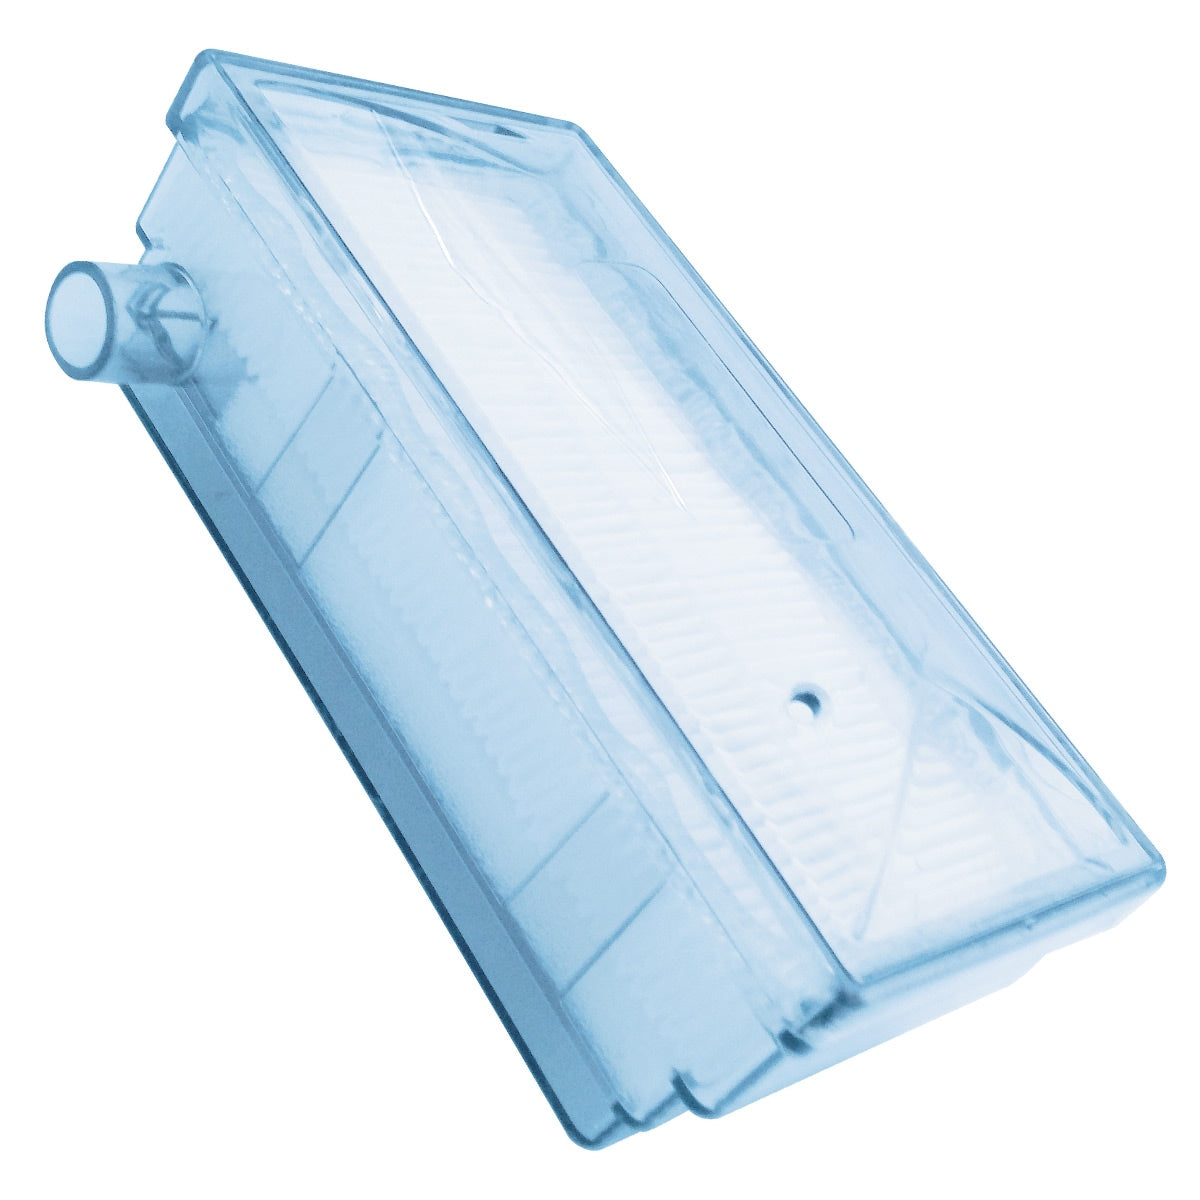 Clear Intake Filter for EverFlo & EverFlo Q Stationary Oxygen Concentrators